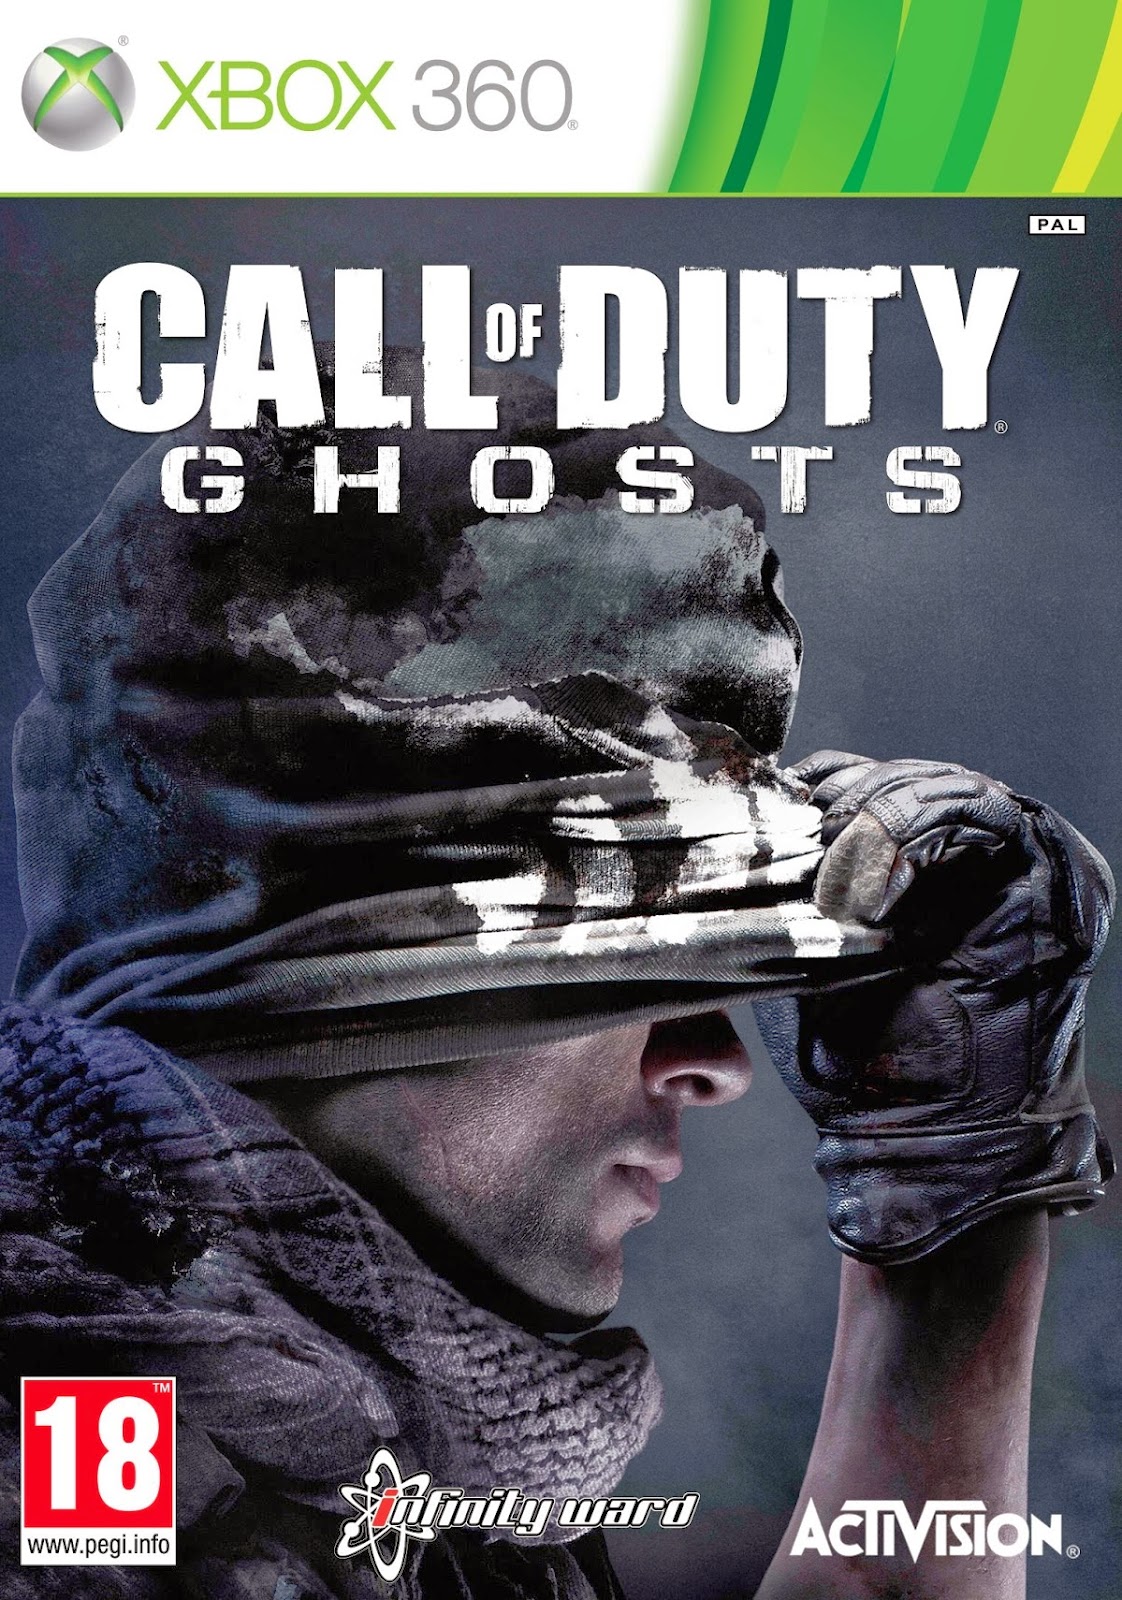 Call of duty xbox game. Call of Duty Ghosts Xbox 360. Call of Duty Ghosts Xbox 360 обложка. Call of Duty диск на иксбокс 360. Call of Duty диск на Xbox 360.